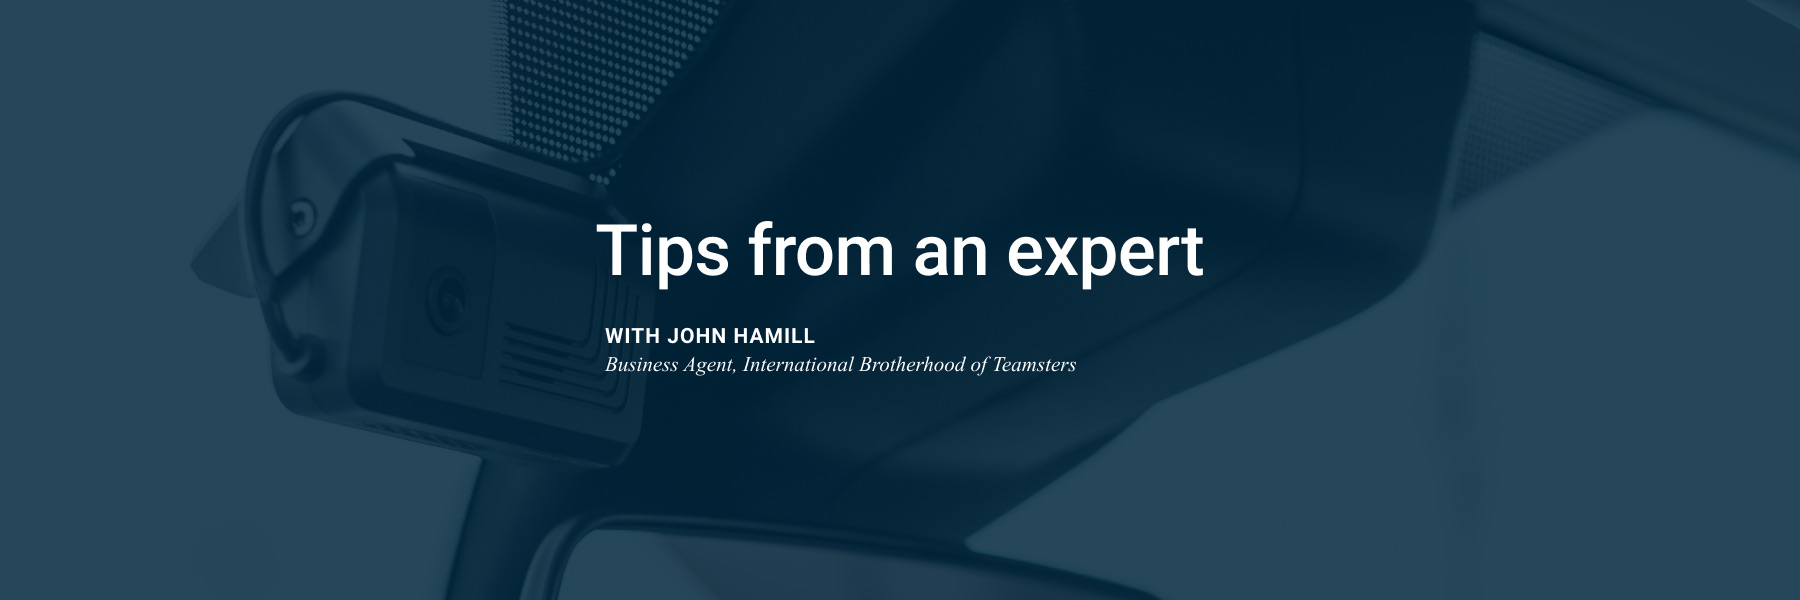 Tips from an Expert: John Hamill, Teamsters Business Agent